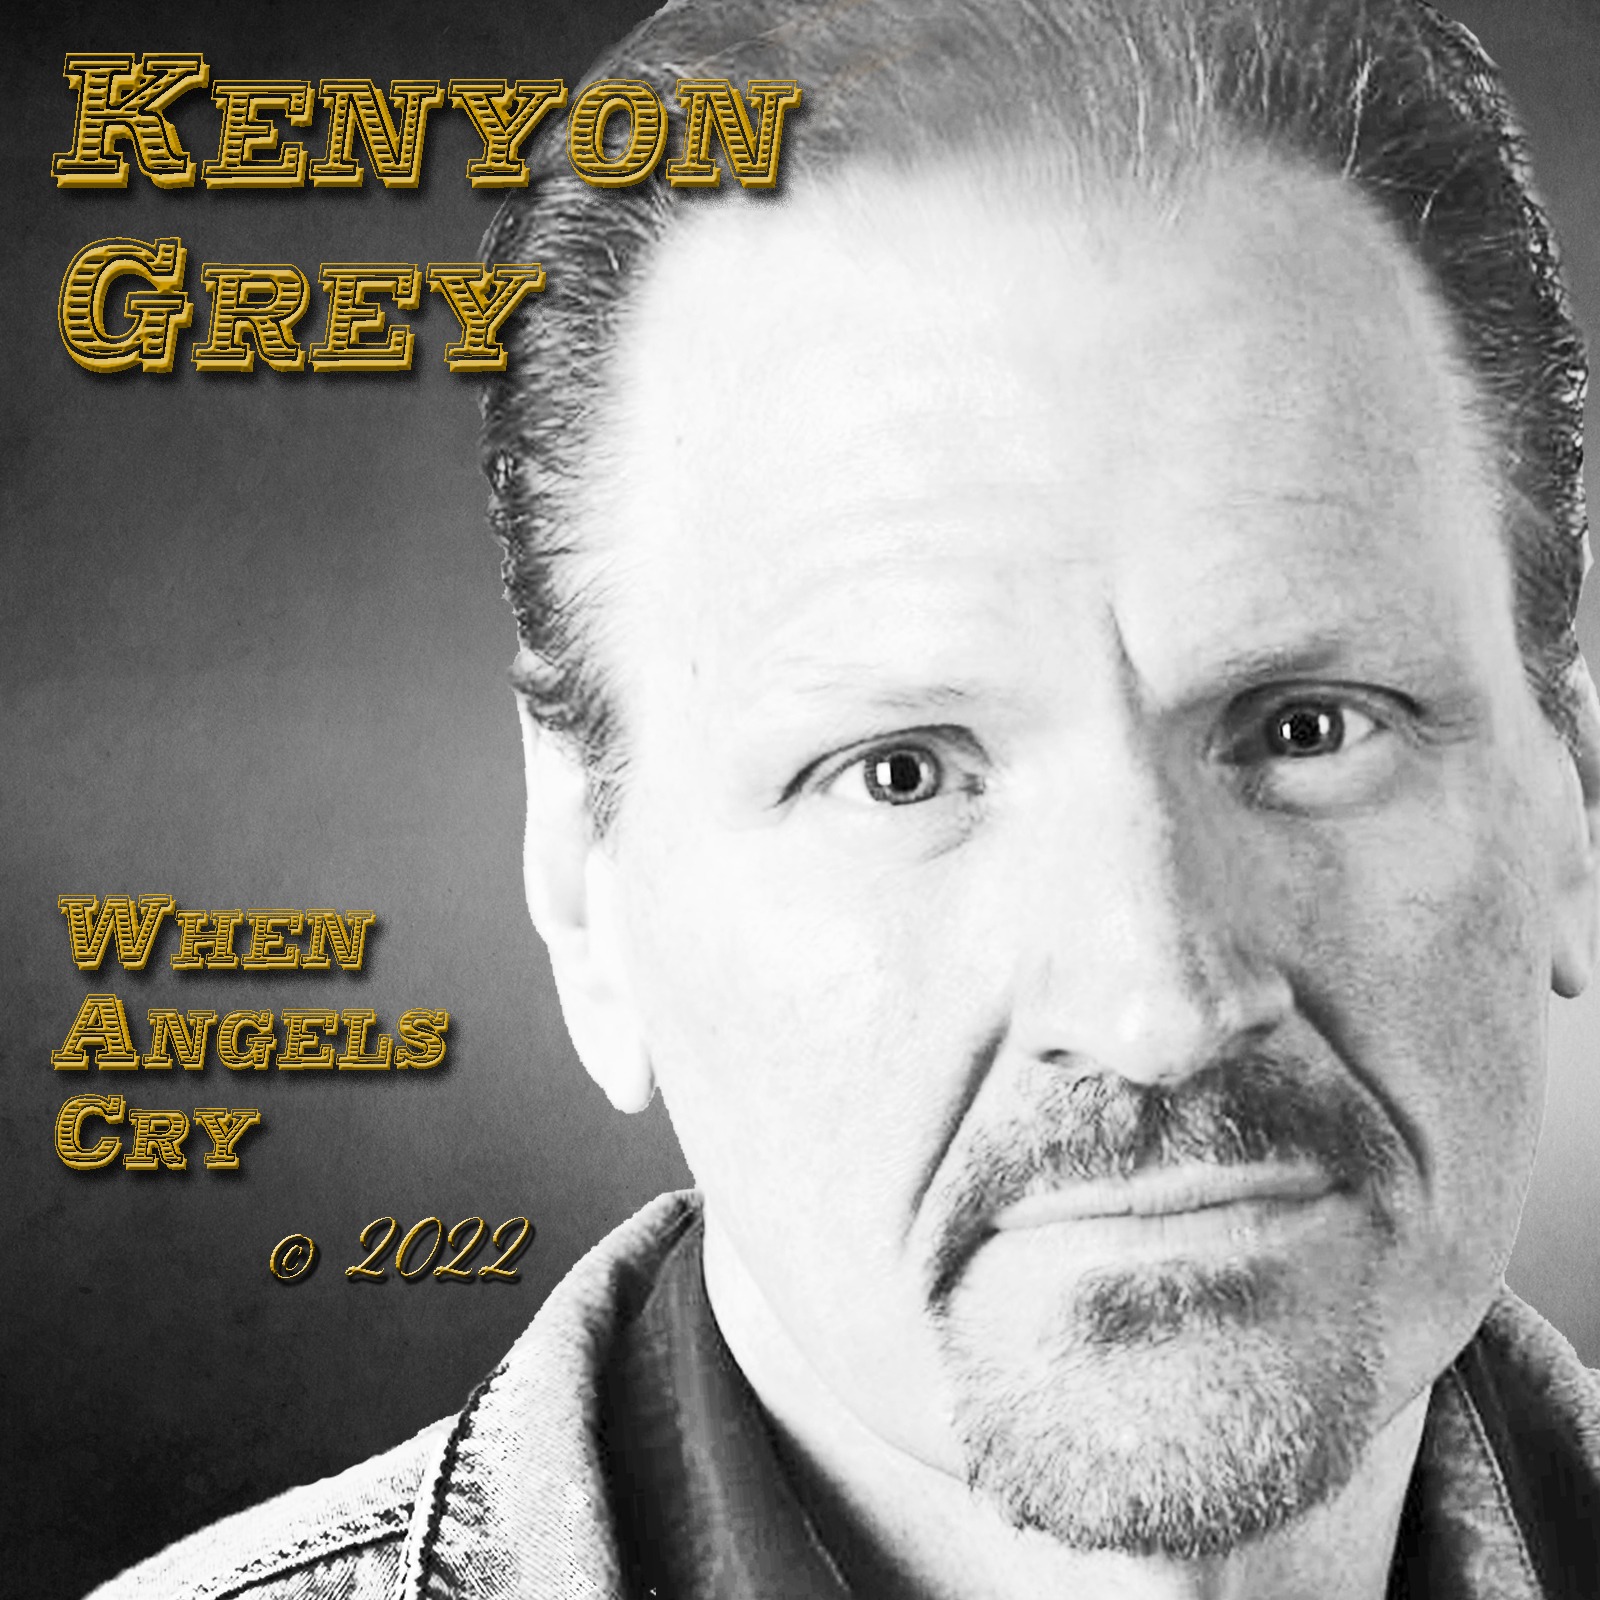 Kenyon Grey to Release New Song "When Angels Cry" through AOK Records (Nashville) on January 6th, 2023